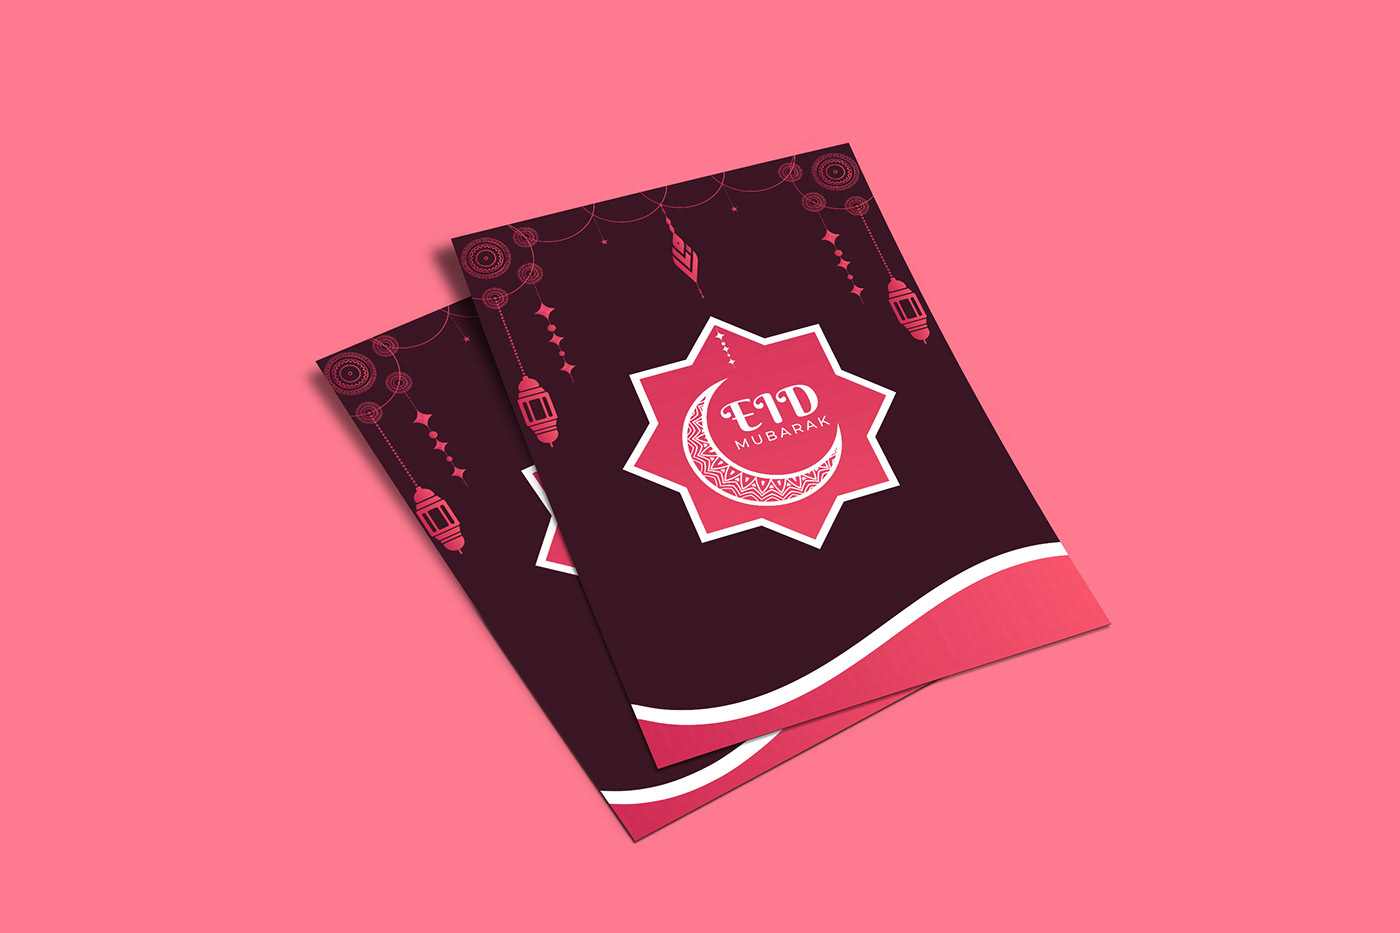 A stylized design for an Eid Mubarak greeting card or brochure cover featuring a maroon background  